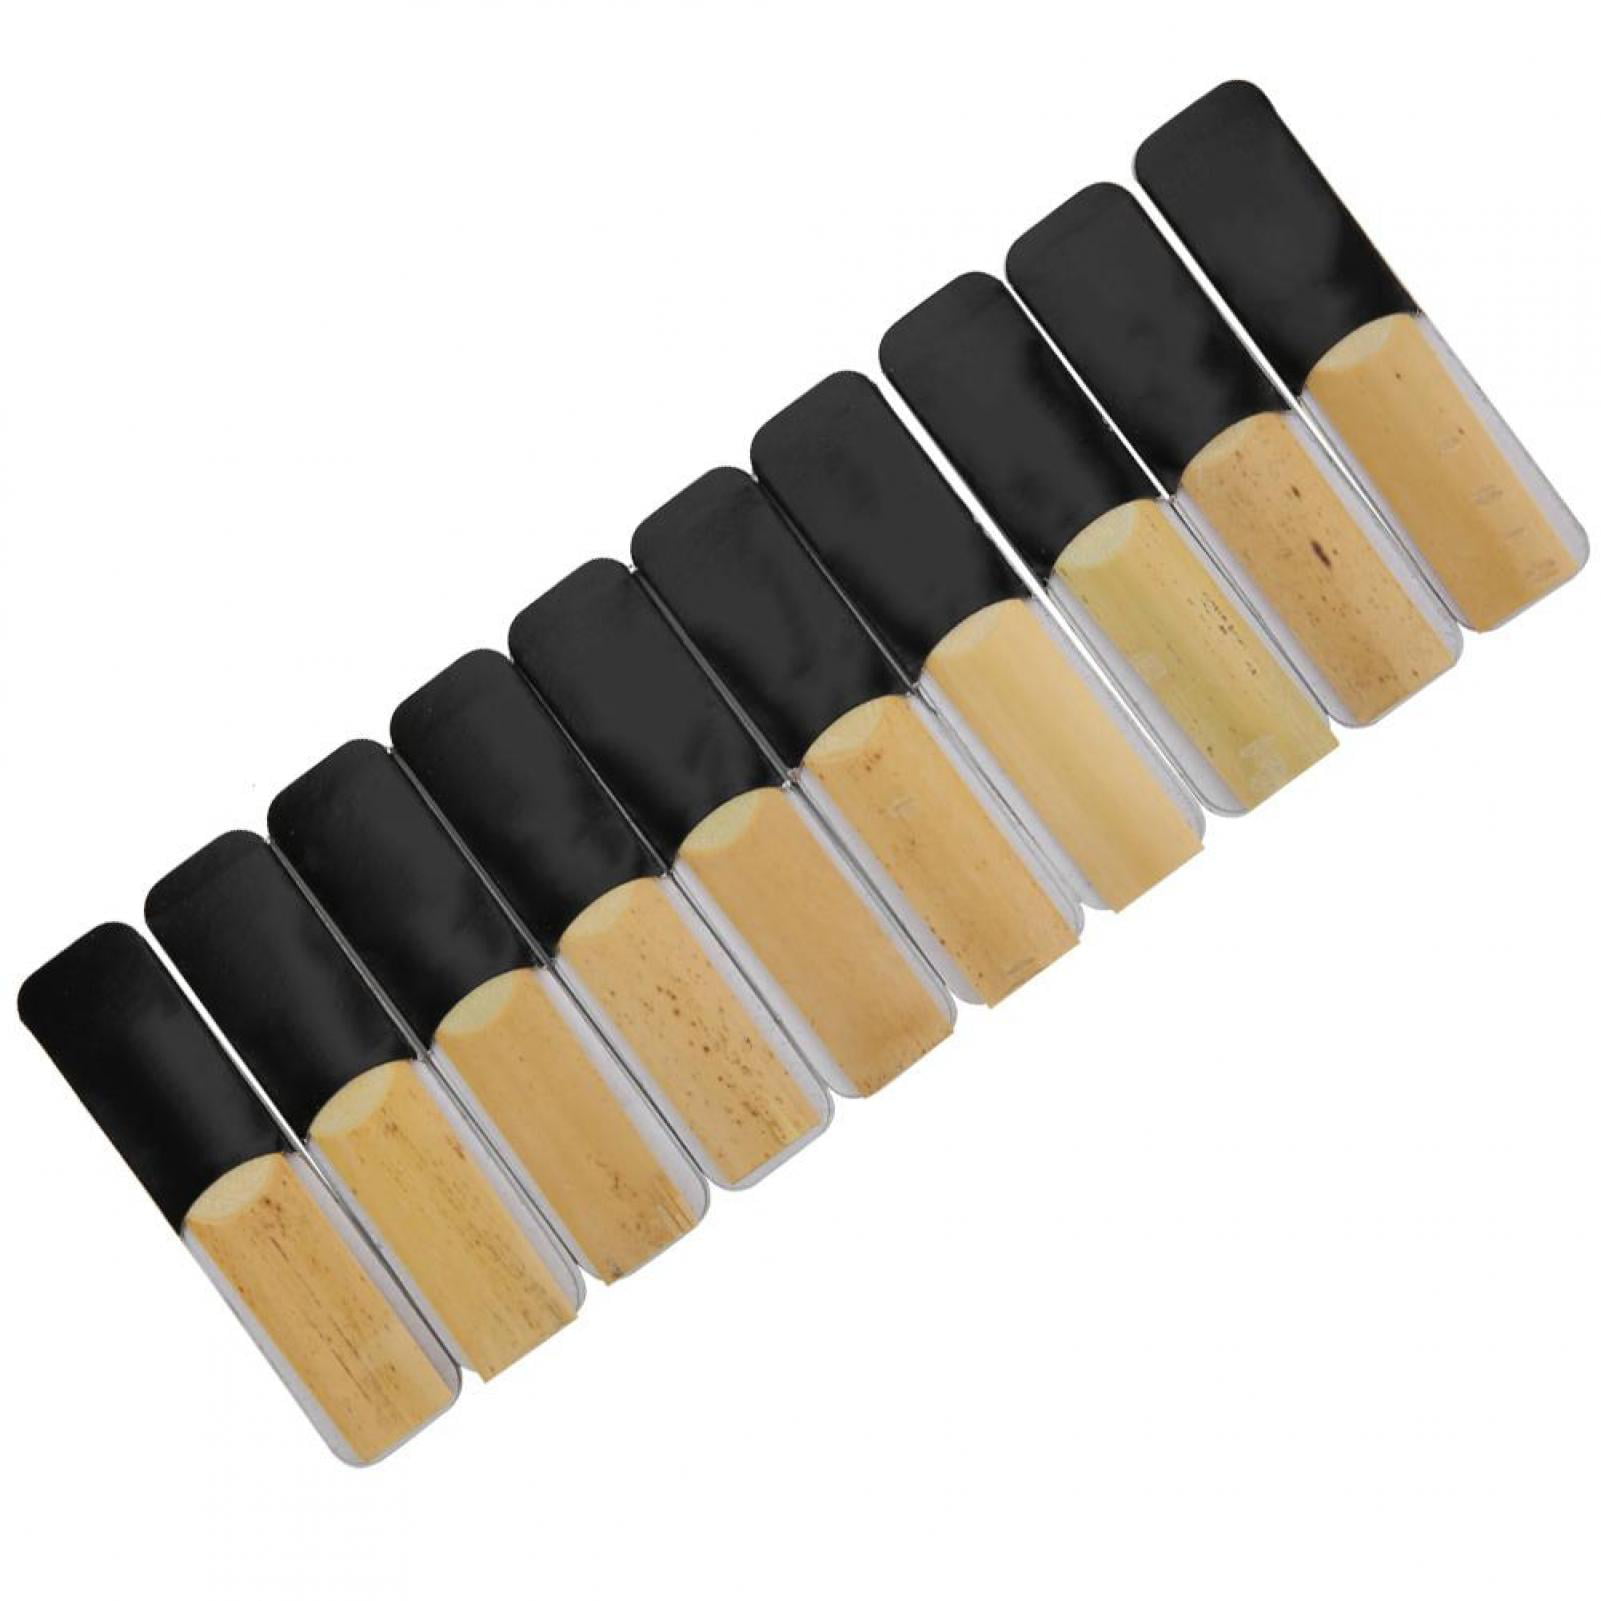 10Pcs Tenor Saxophone Reed 1.5 Strength Replacement Exquisite 3.2 x 0.7in Sax Reed Musical Instrument Accessories 